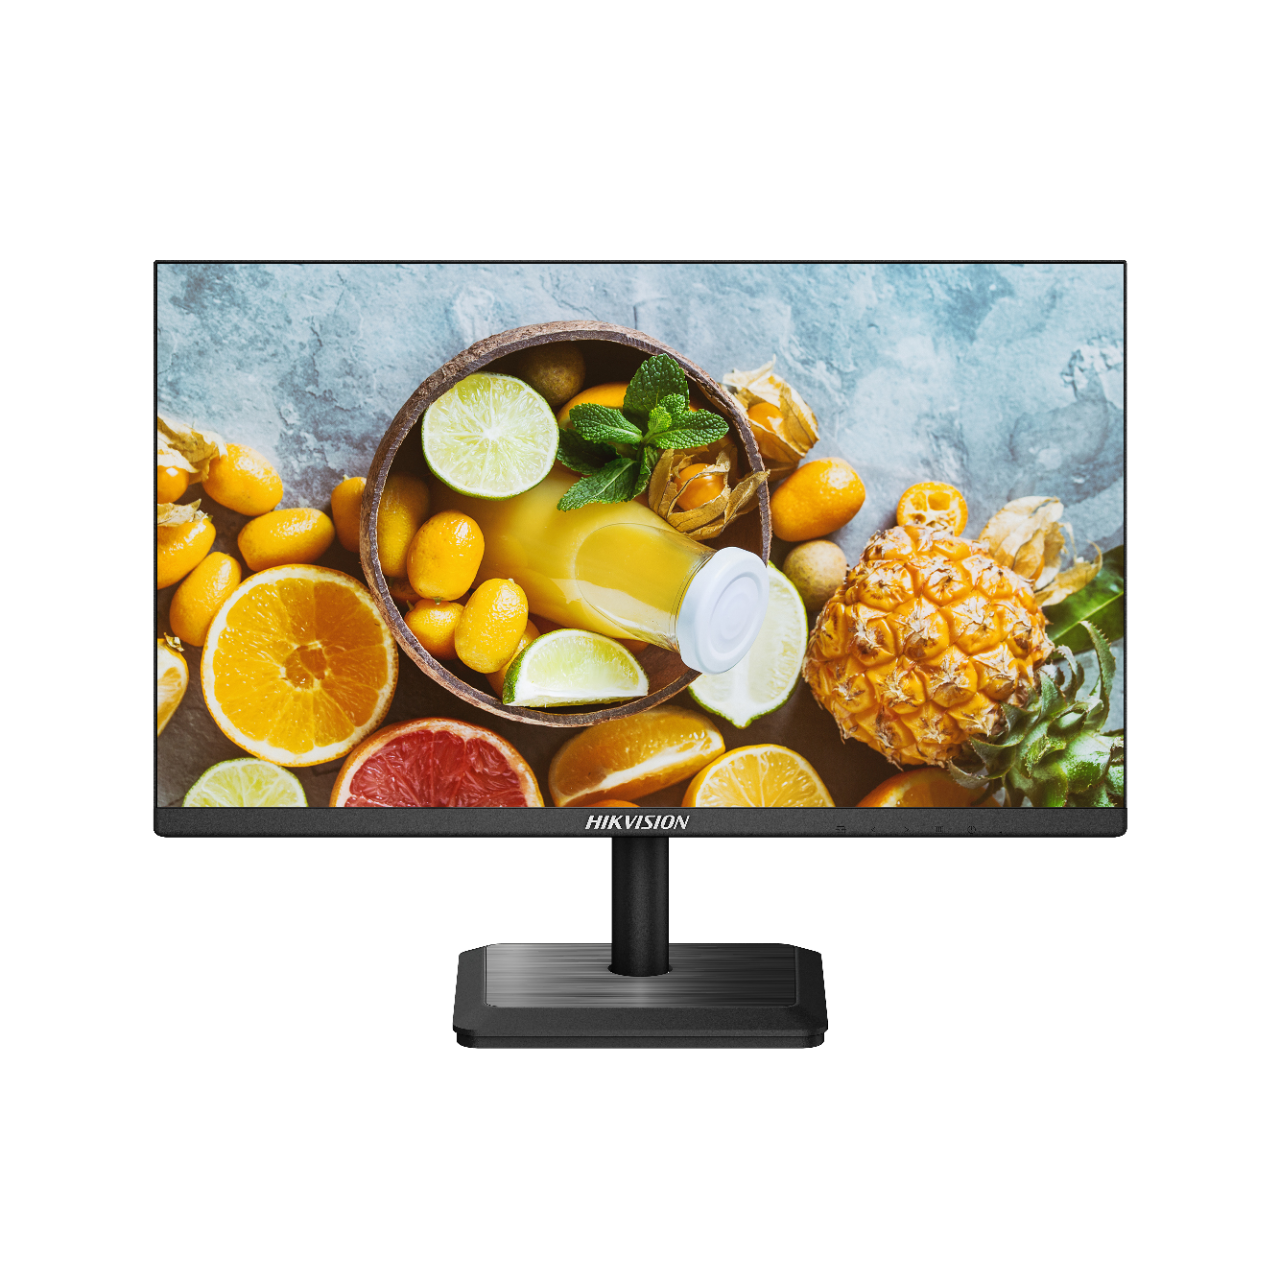 Hikvision DS-D5024FC-C 24-inch Full HD Monitor